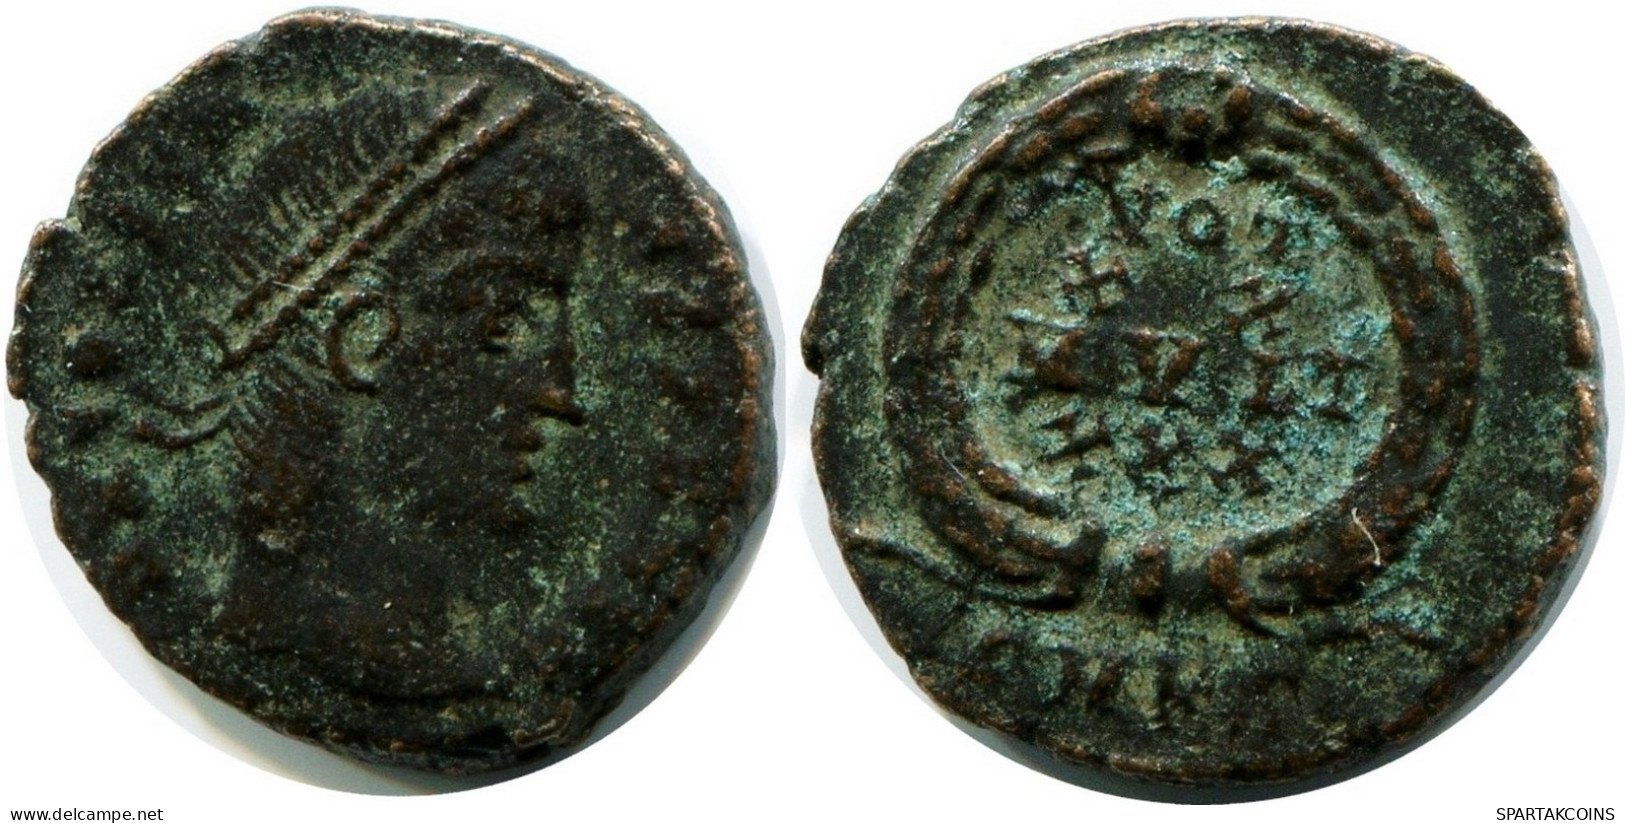 CONSTANS MINTED IN CYZICUS FROM THE ROYAL ONTARIO MUSEUM #ANC11591.14.D.A - L'Empire Chrétien (307 à 363)